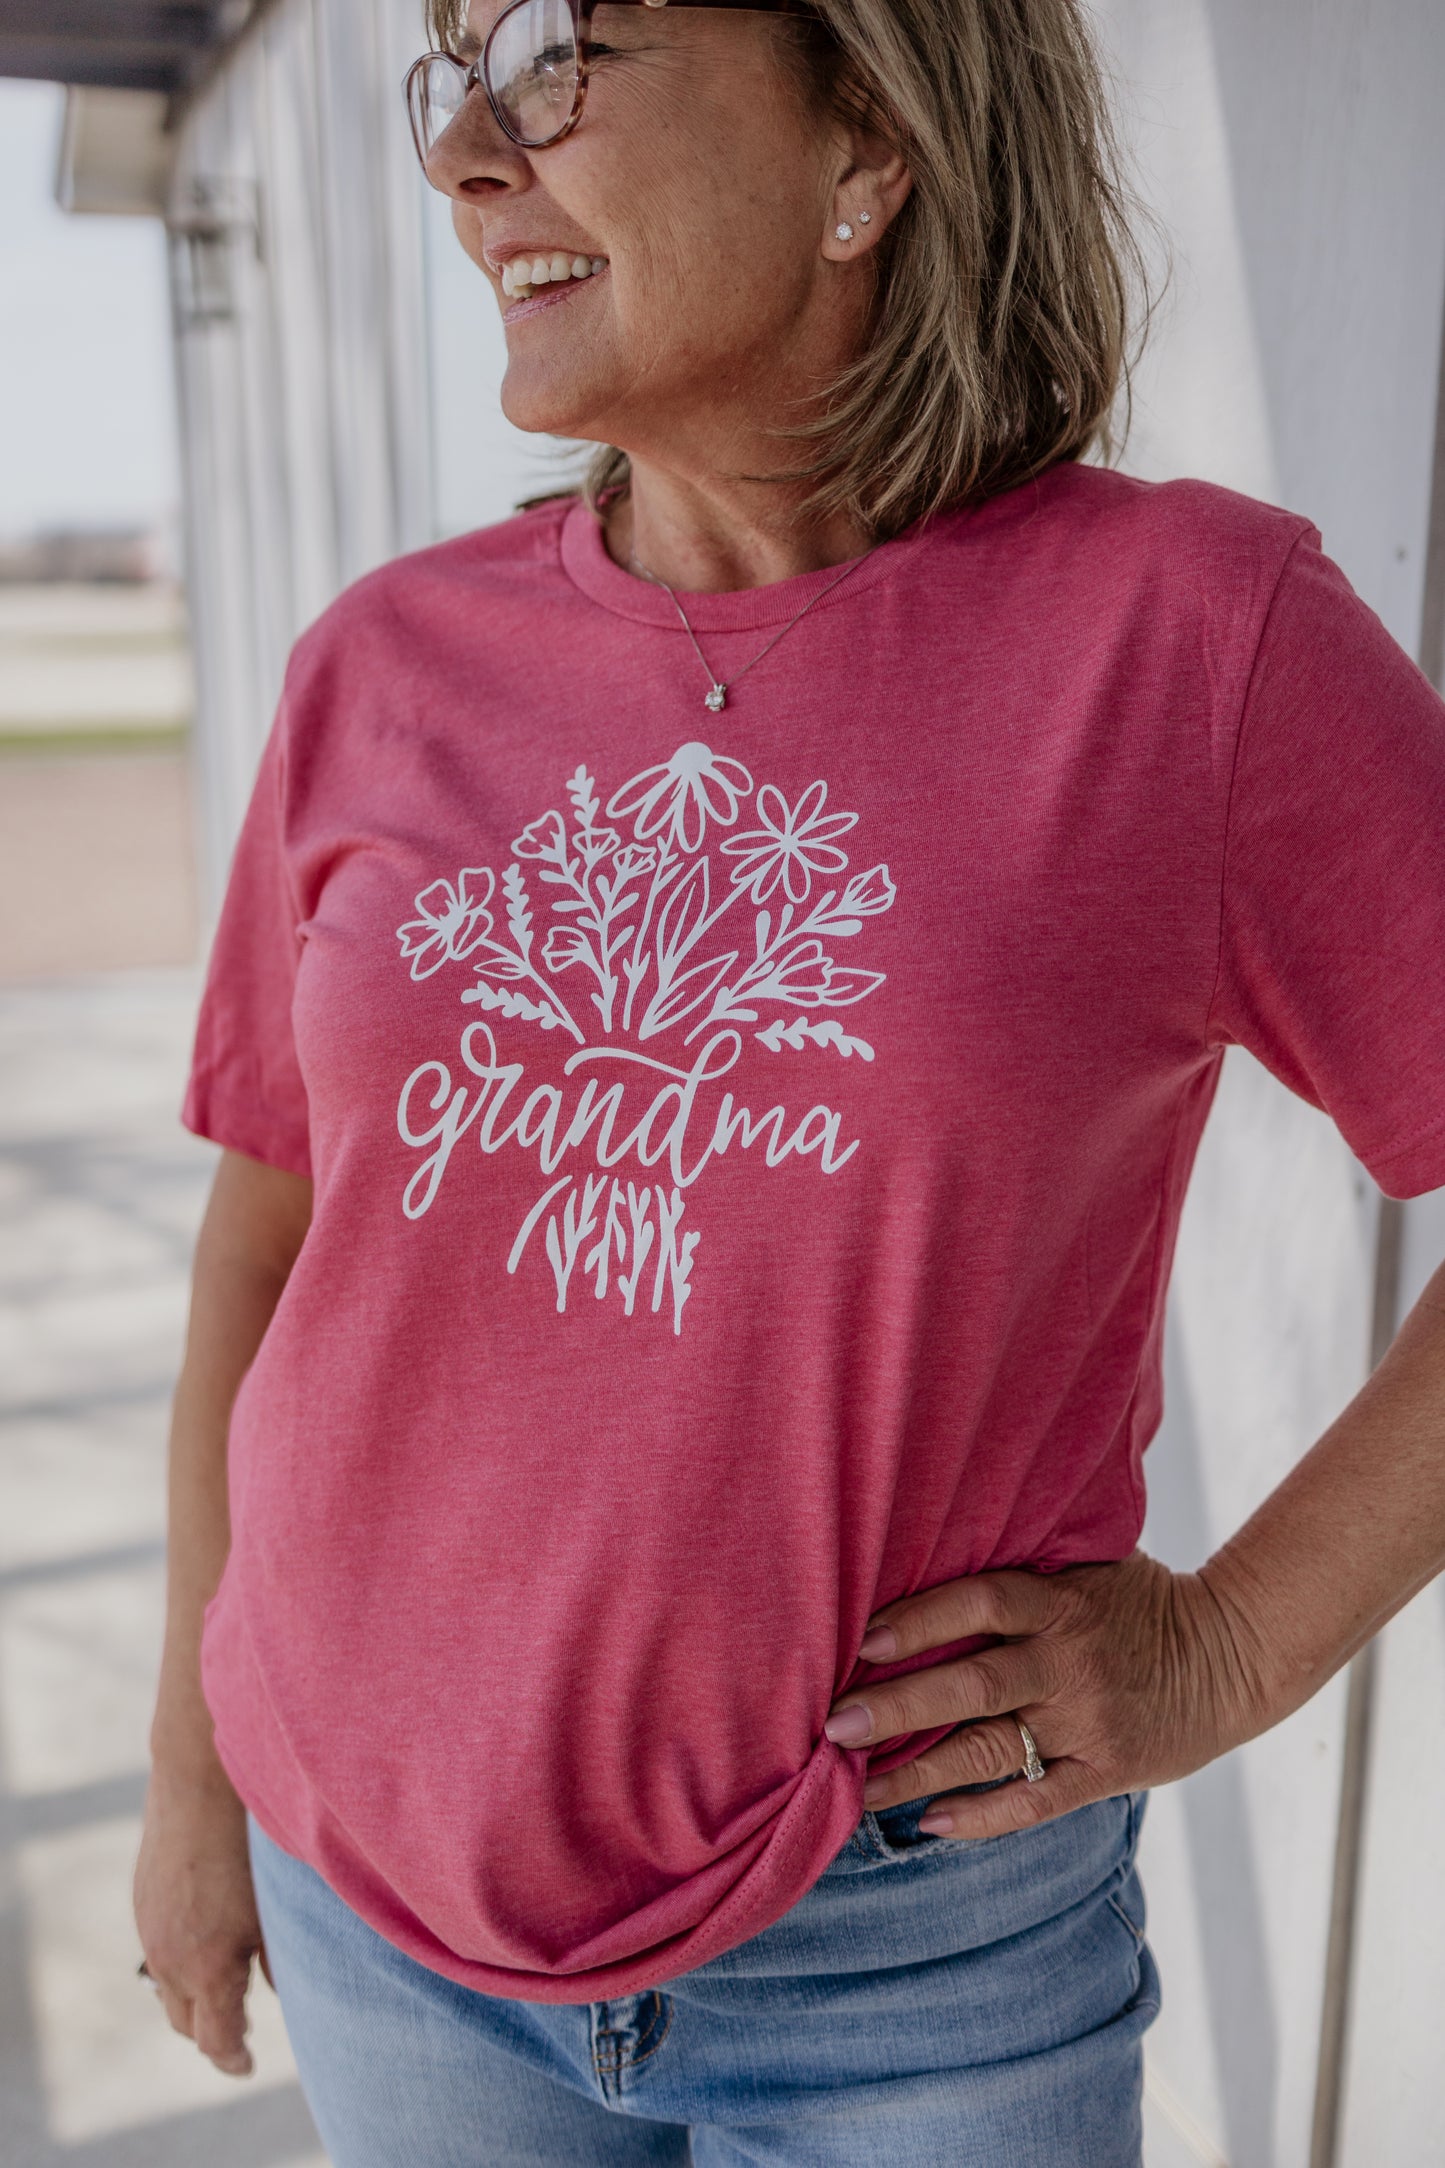 GRANDMA WITH FLOWER BOUQUET GRAPHIC TEE